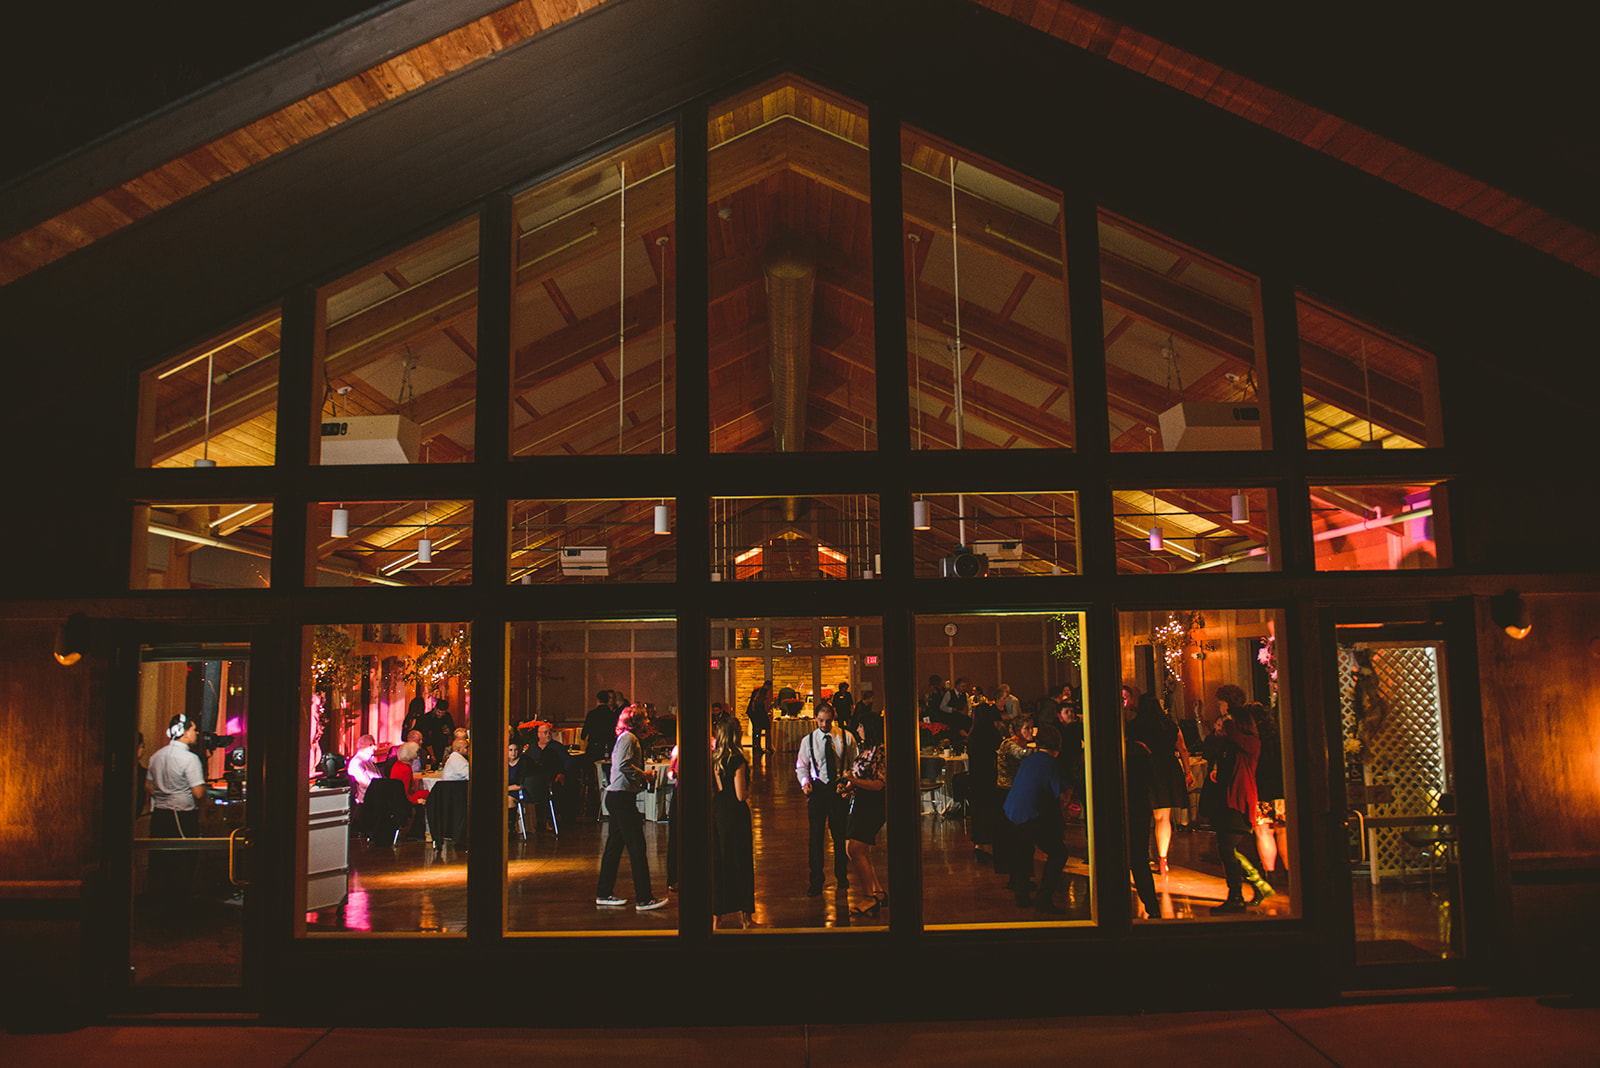 the exterior of the Four Rivers Environmental Education Center at night with a wedding reception taking place